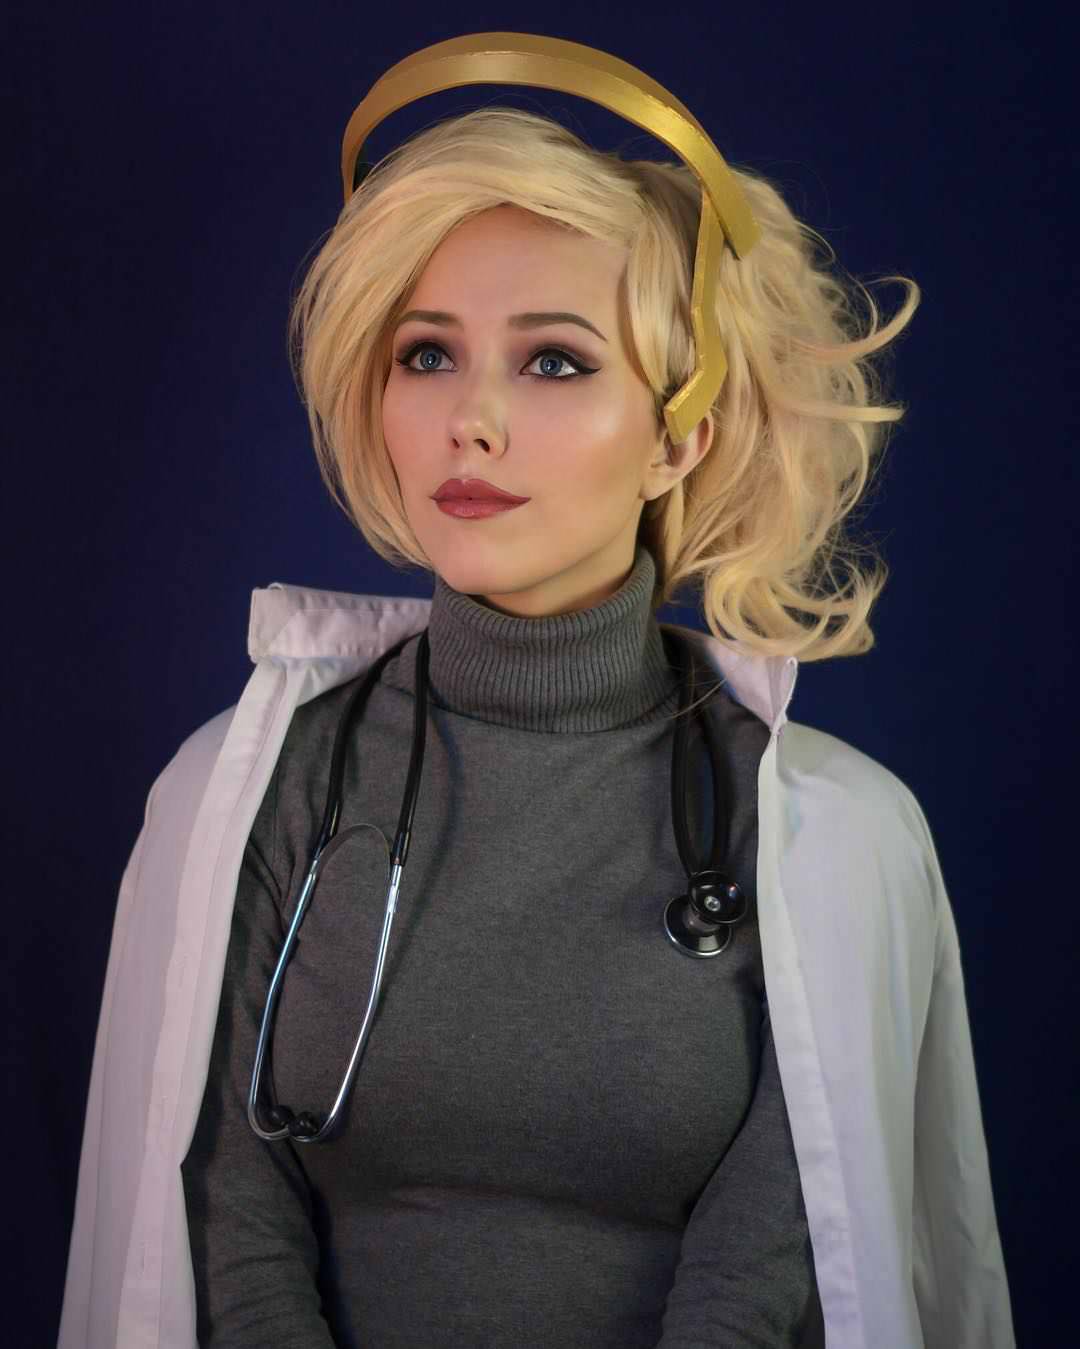 Hot woman dressed as futuristic doctor.